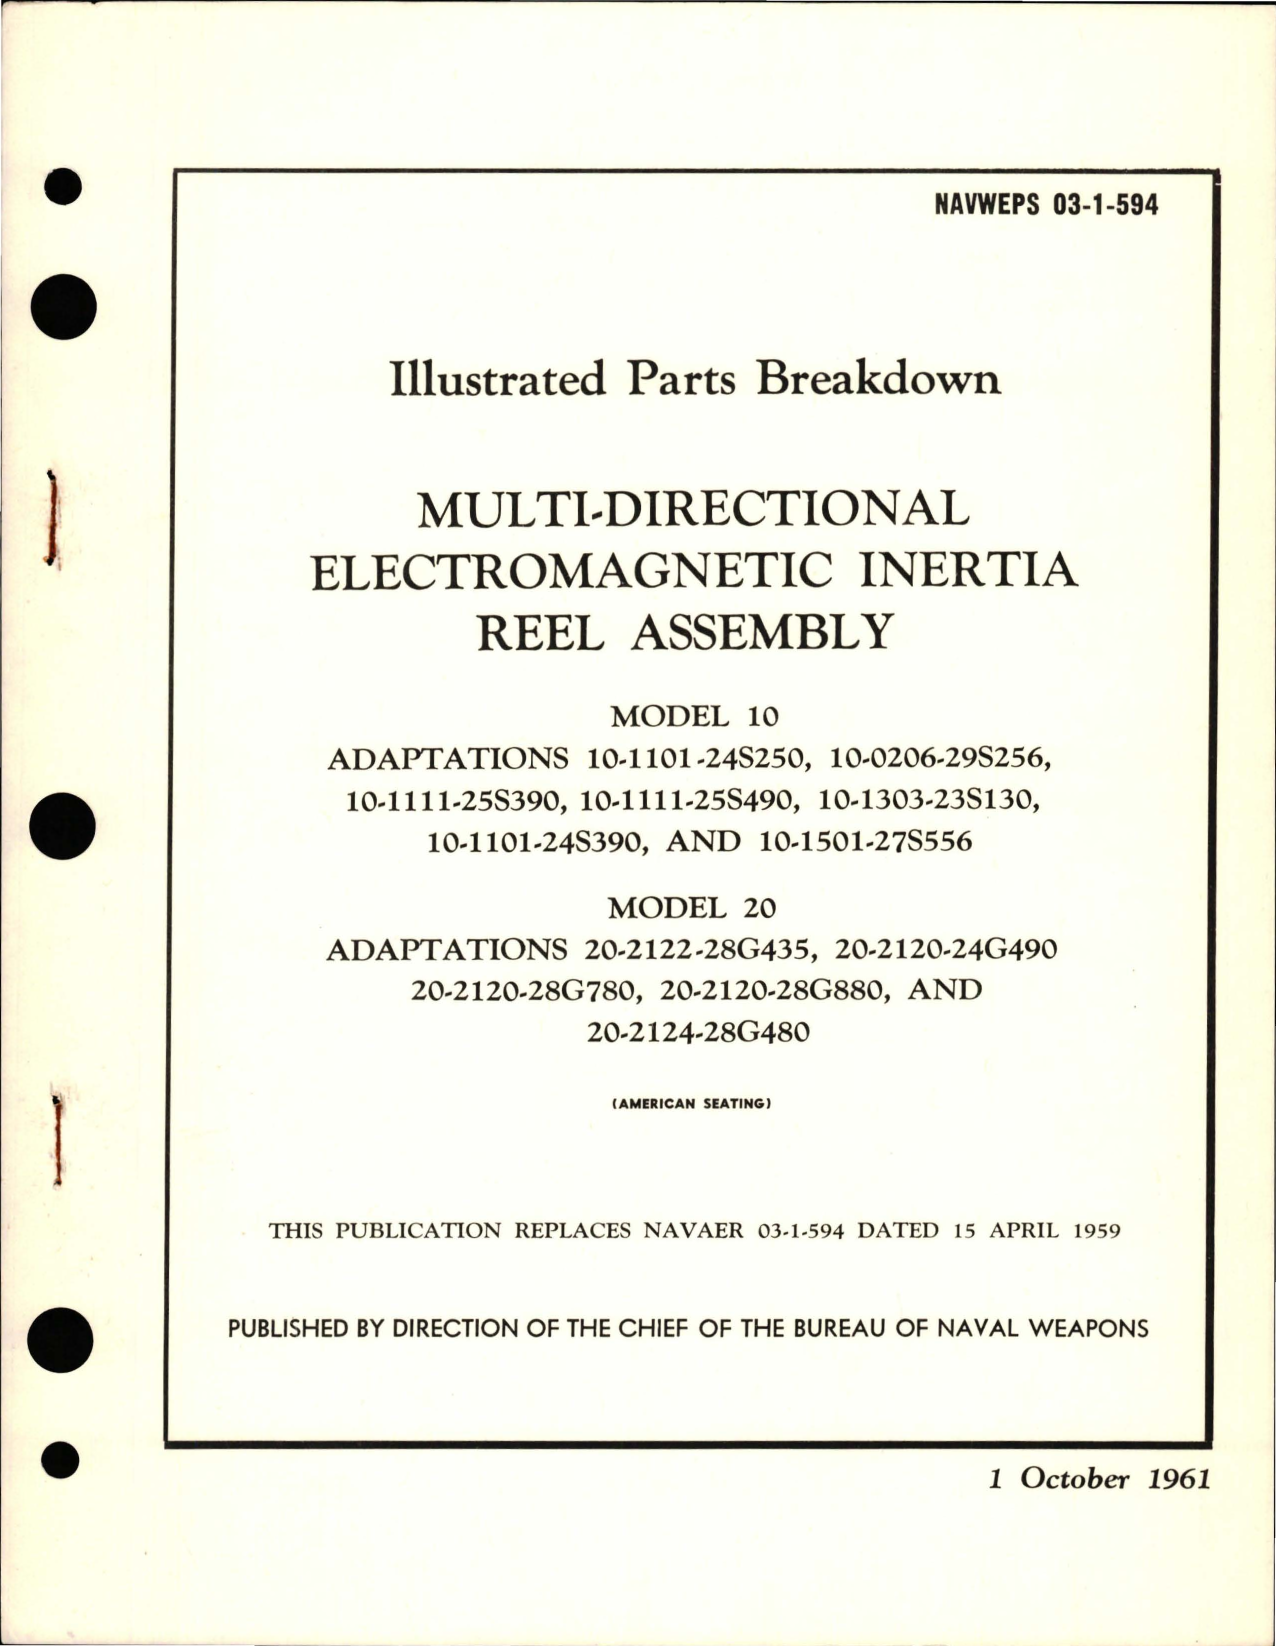 Sample page 1 from AirCorps Library document: Illustrated Parts Breakdown for Multi-Directional Electromagnetic Inertia Reel Assembly - Model 10 and Model 20